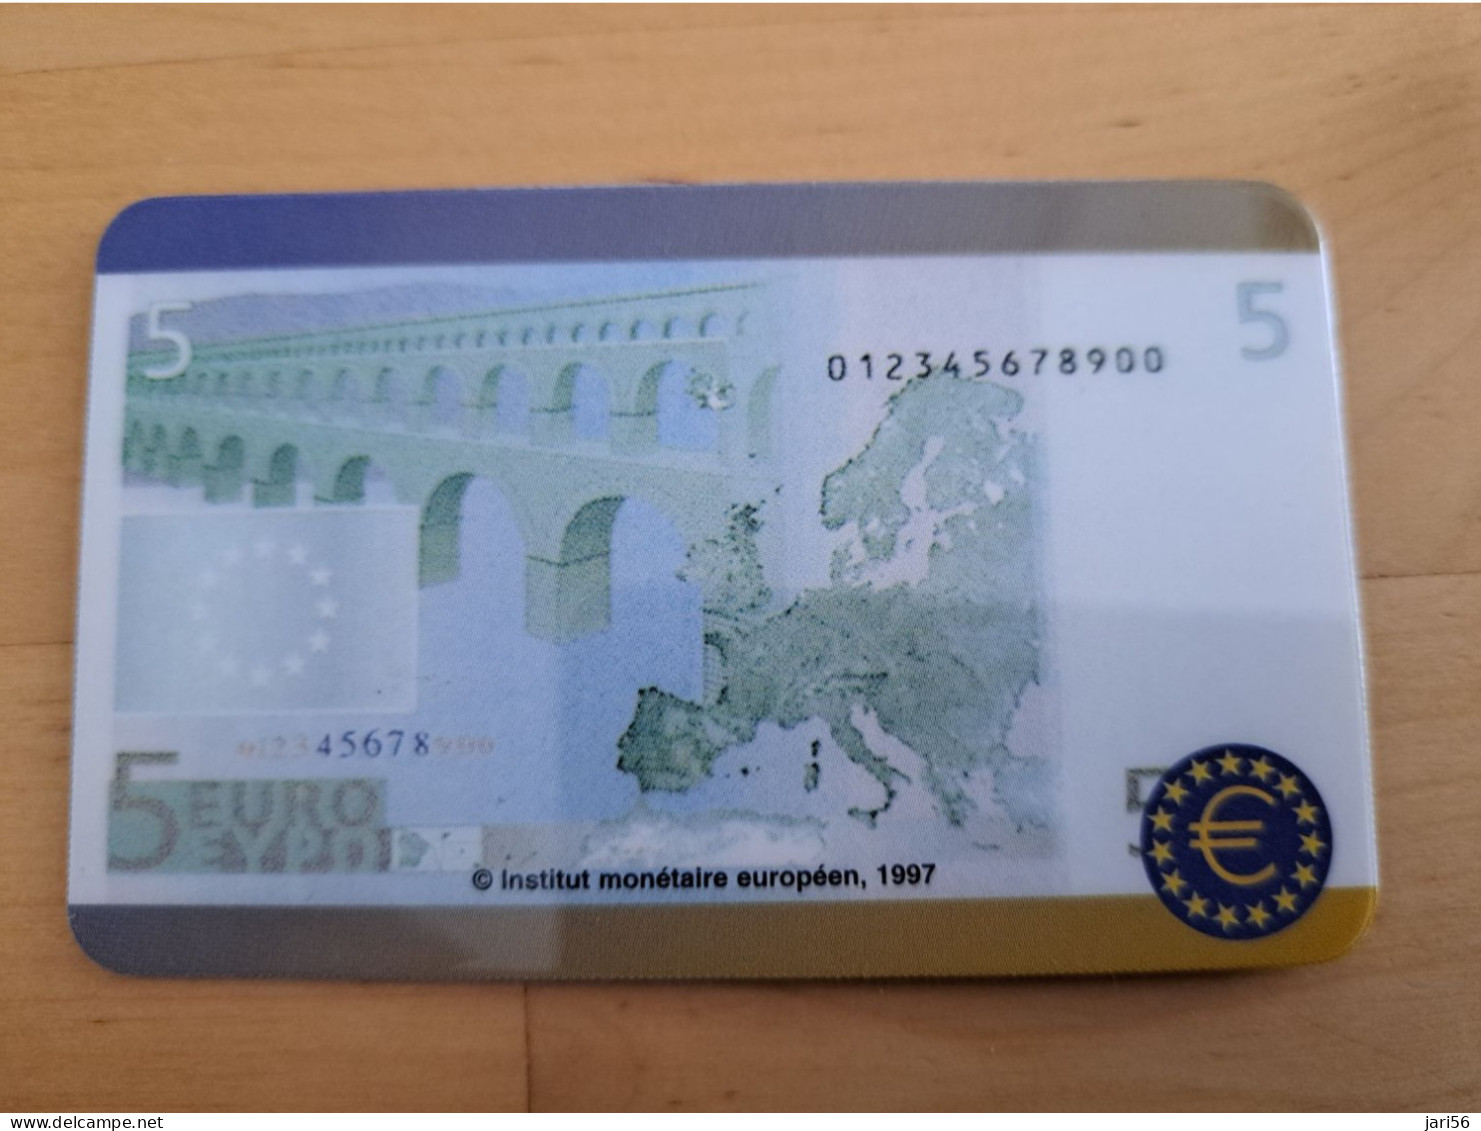 GREAT BRITAIN   20 UNITS   / EURO COINS/ BILJET 5 EURO  / BACK   (date 09/98)  PREPAID CARD / MINT      **15049** - Collections